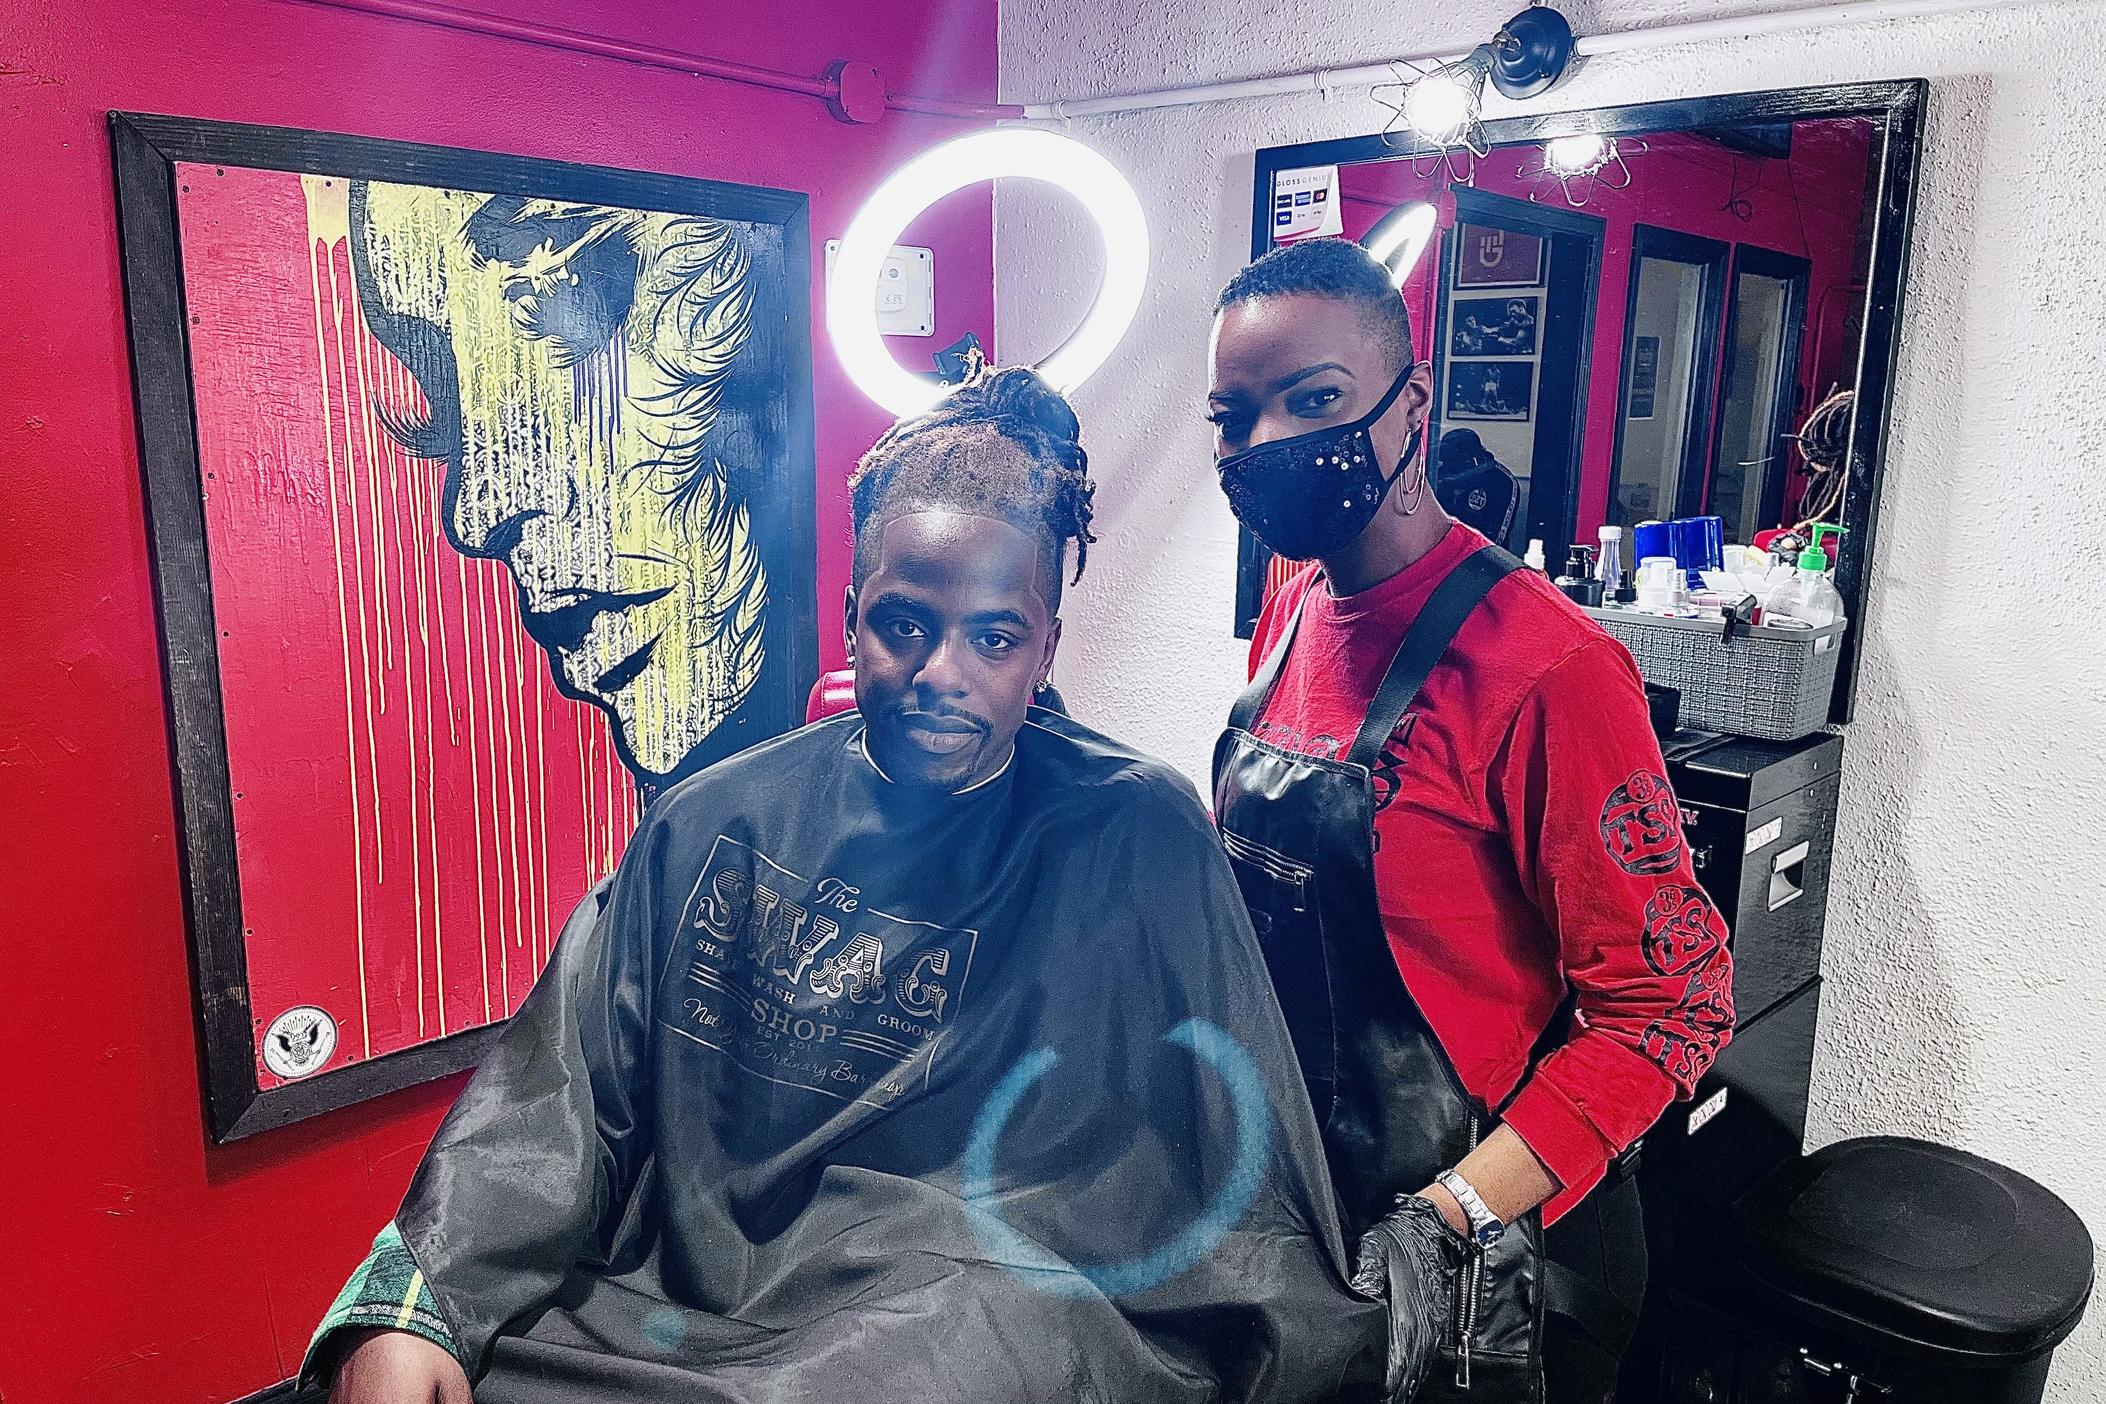 At Michael "Killer Mike" Render's barber shop The Swag Shop, customer Rizzo Gun and barber Paige Marie reacted to Thursday night's news that Atlanta mayor Keisha Lance Bottoms would not seek re-election: "Speaker 2: whoever's coming up next has to kind of like follow the bar she set. You know, I mean, you have to kind of get with the culture of Atlanta because Atlanta is the future."